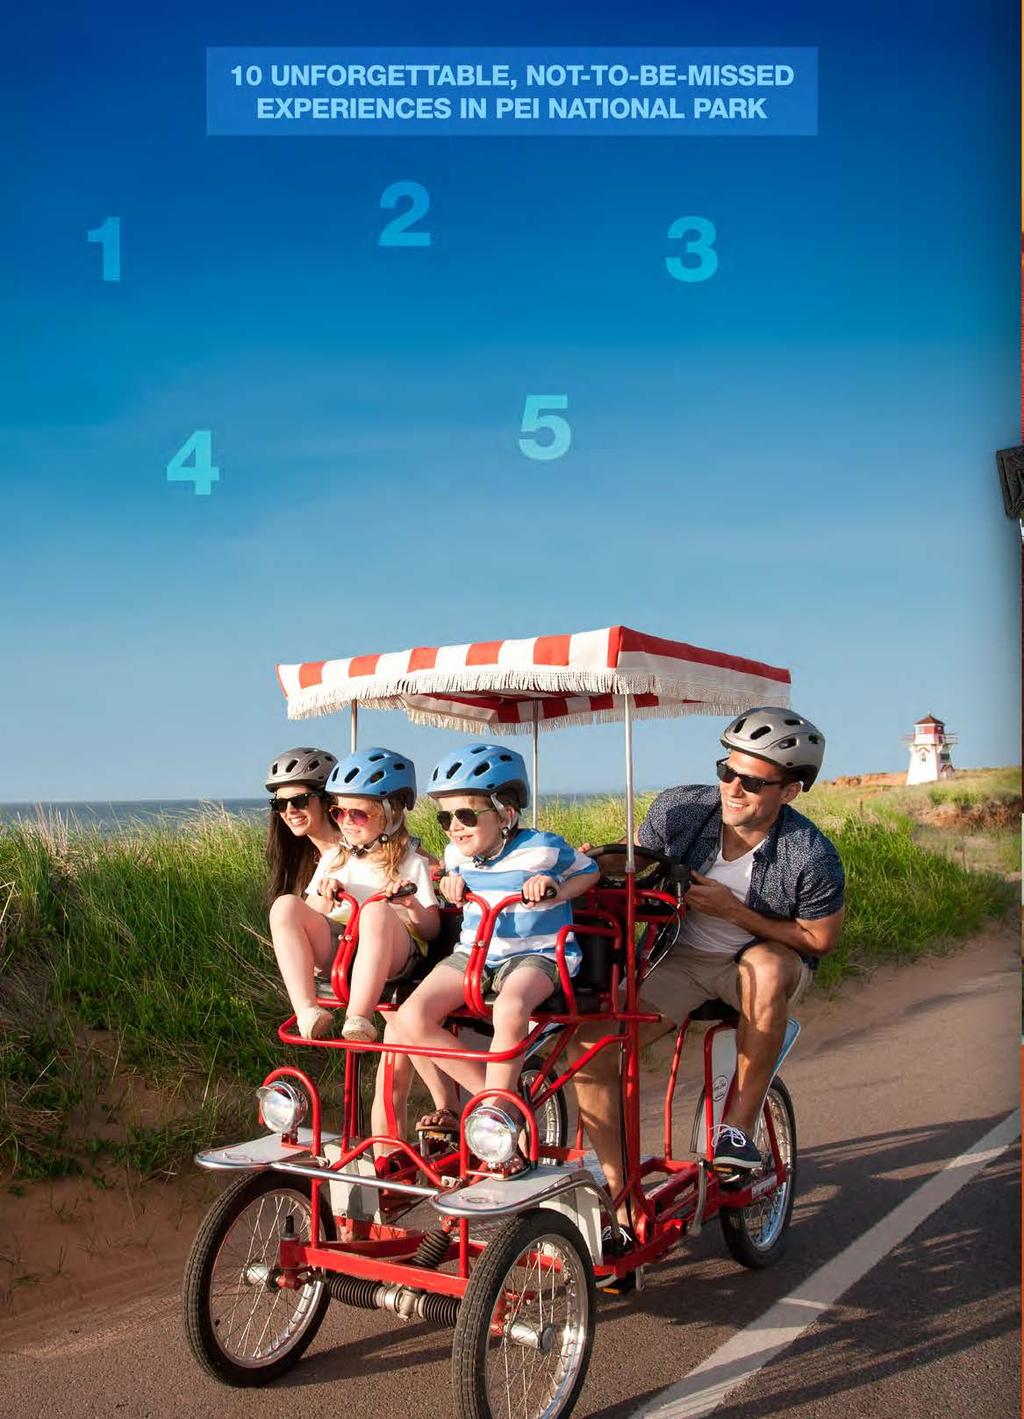 Kids are invited to take part in the Xplorer challenge, completing fun activities all over PEI National Park. Opt for an otentik!